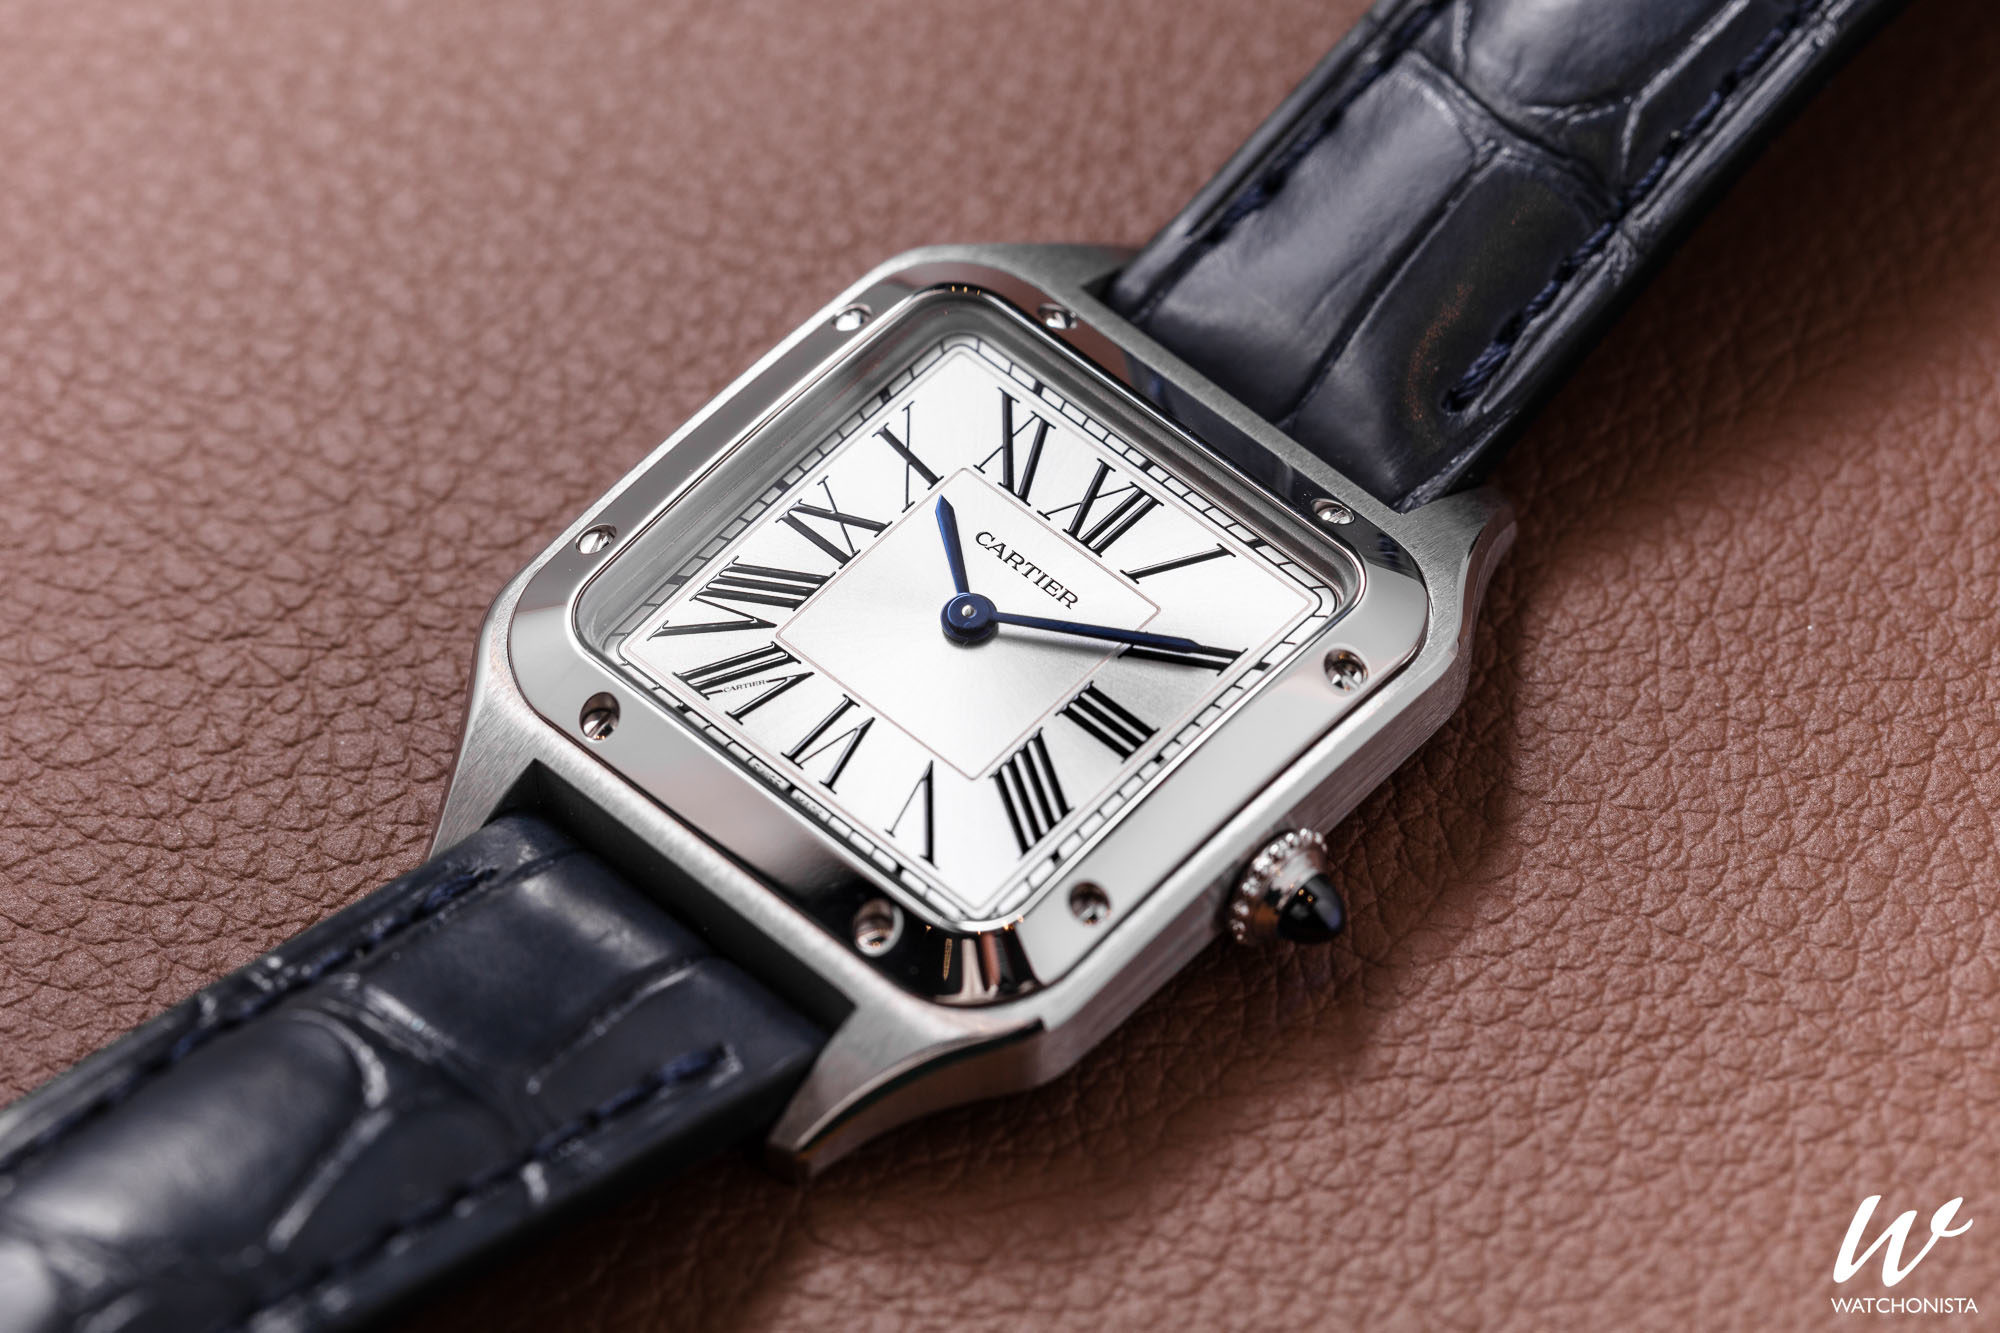 SIHH 2019: Cartier's Wildly Successful 